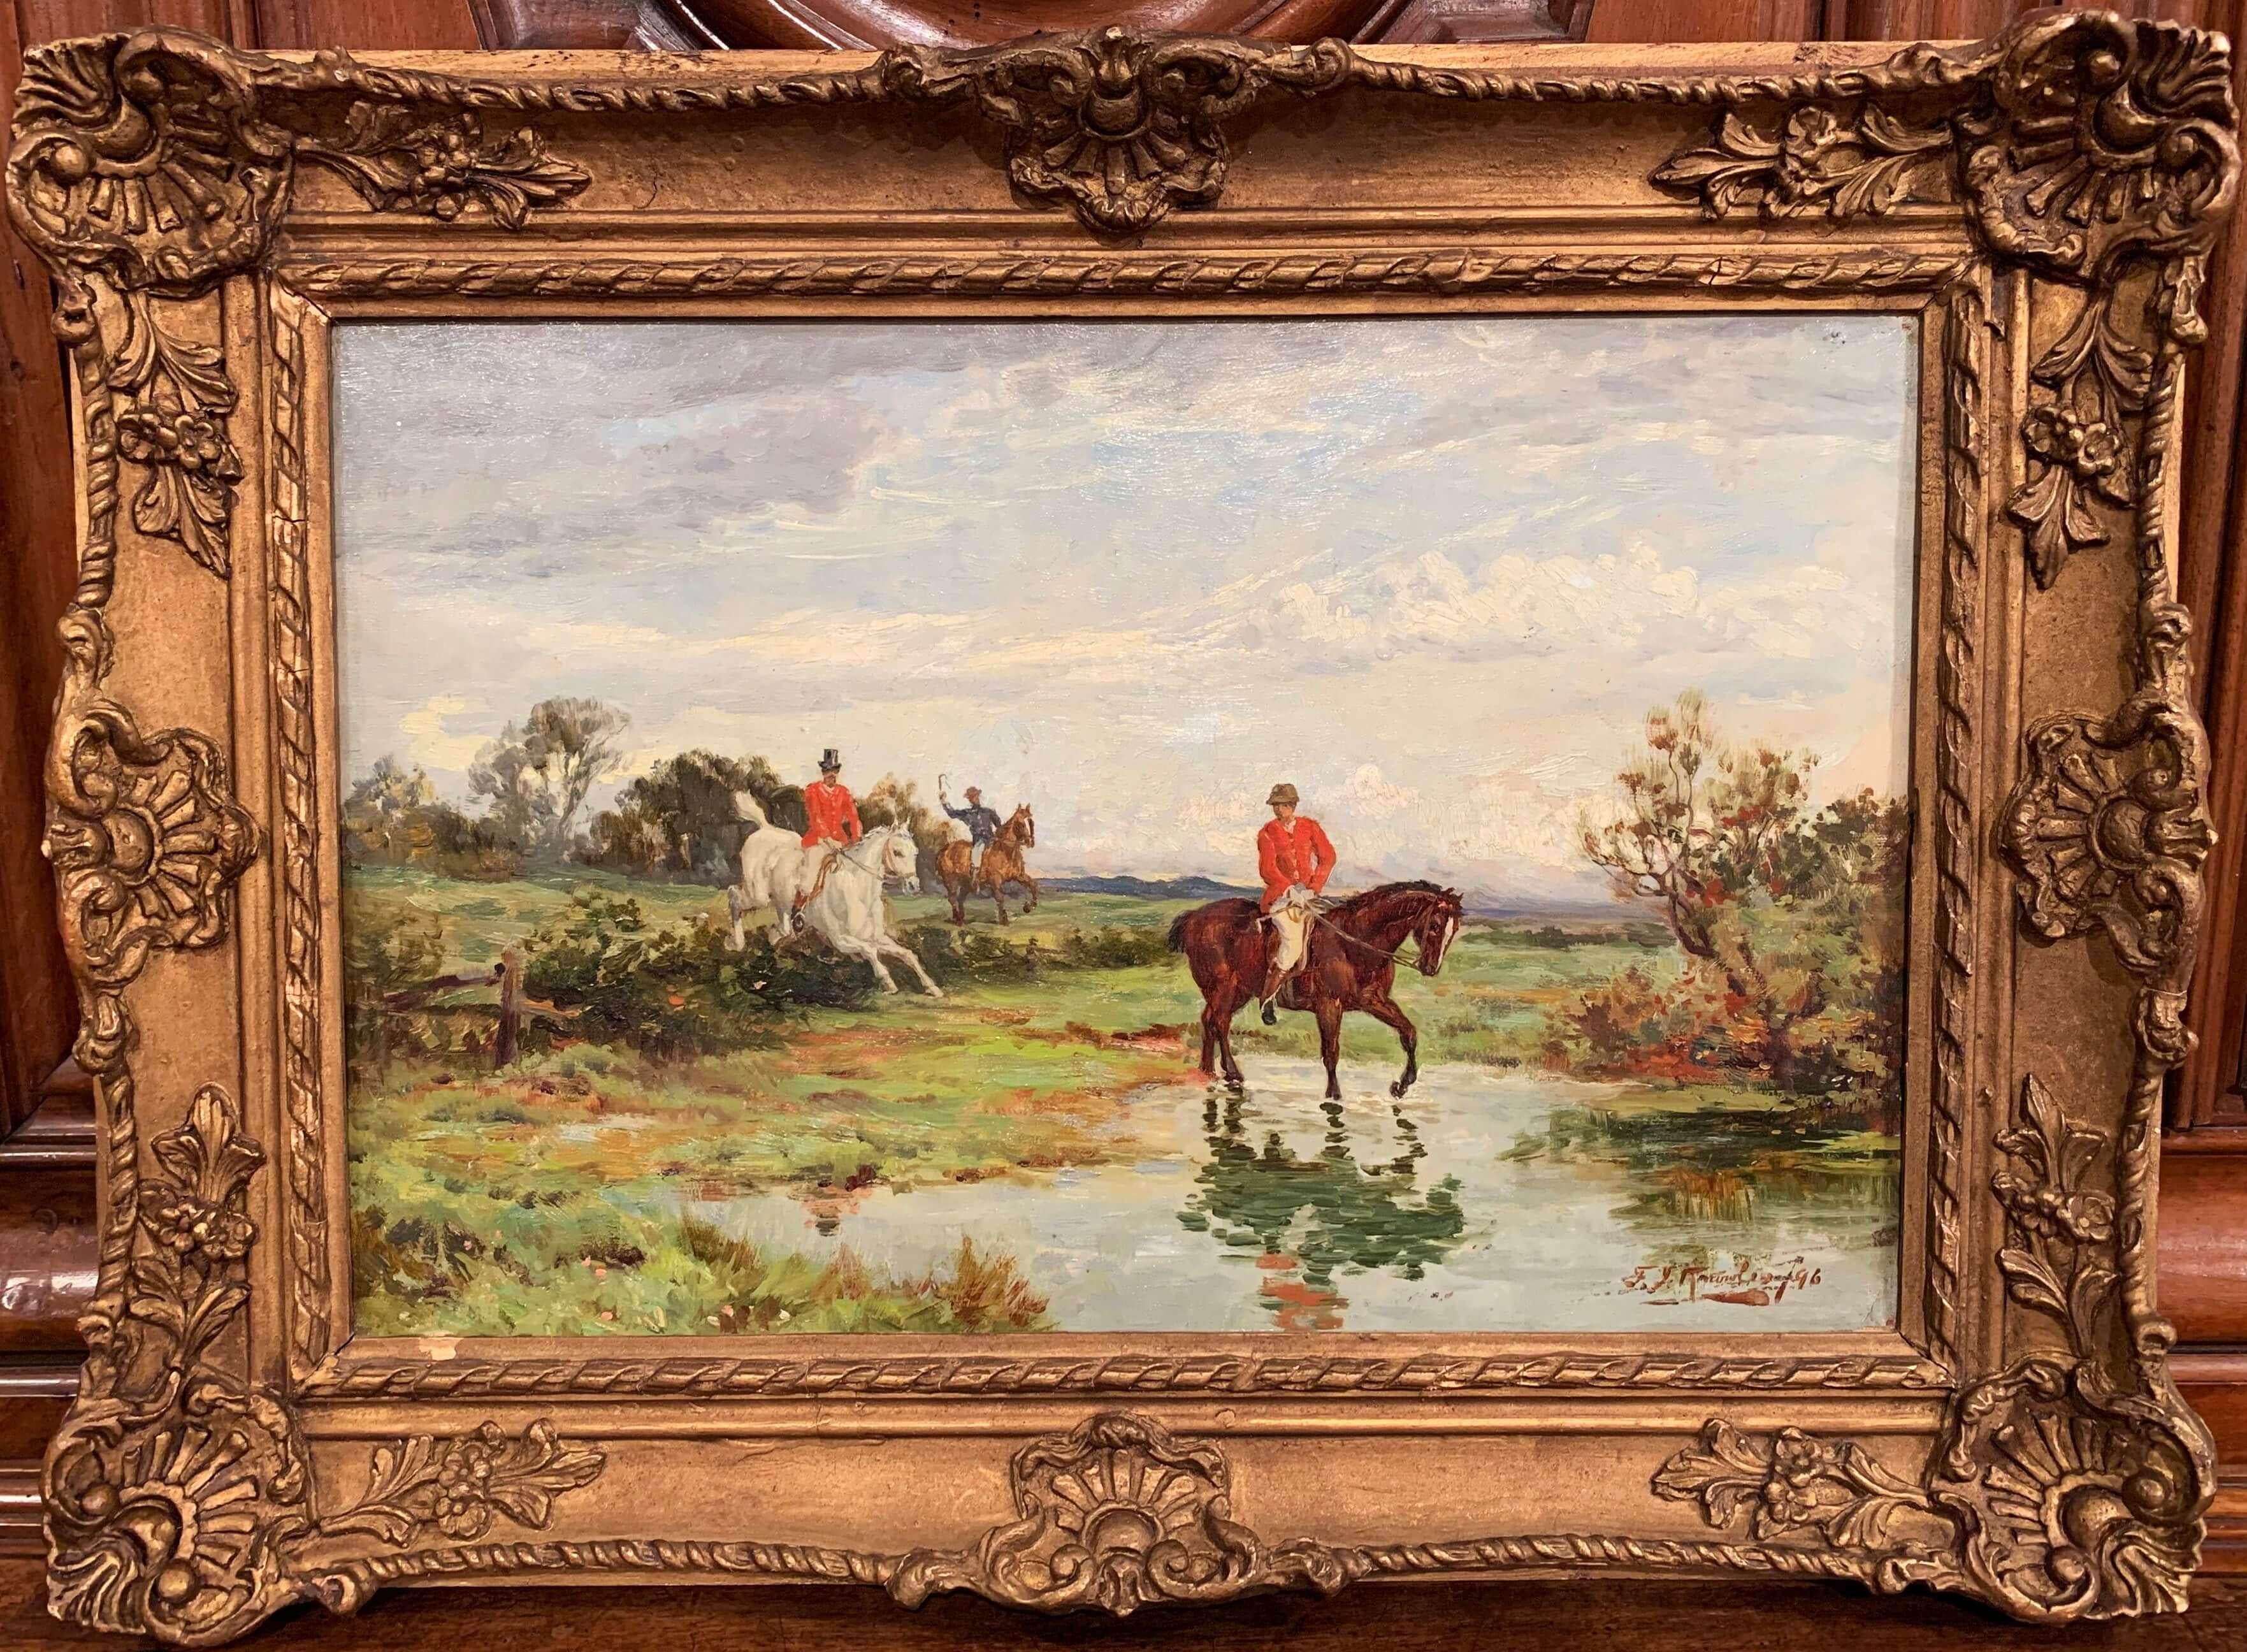 Transport yourself to the English countryside with this pair of 19th century oil on canvas paintings. Set in their original carved gilt frames, the scenes depict two hunt scenes with riders and horses on a hunt. Both of the Classic artworks are